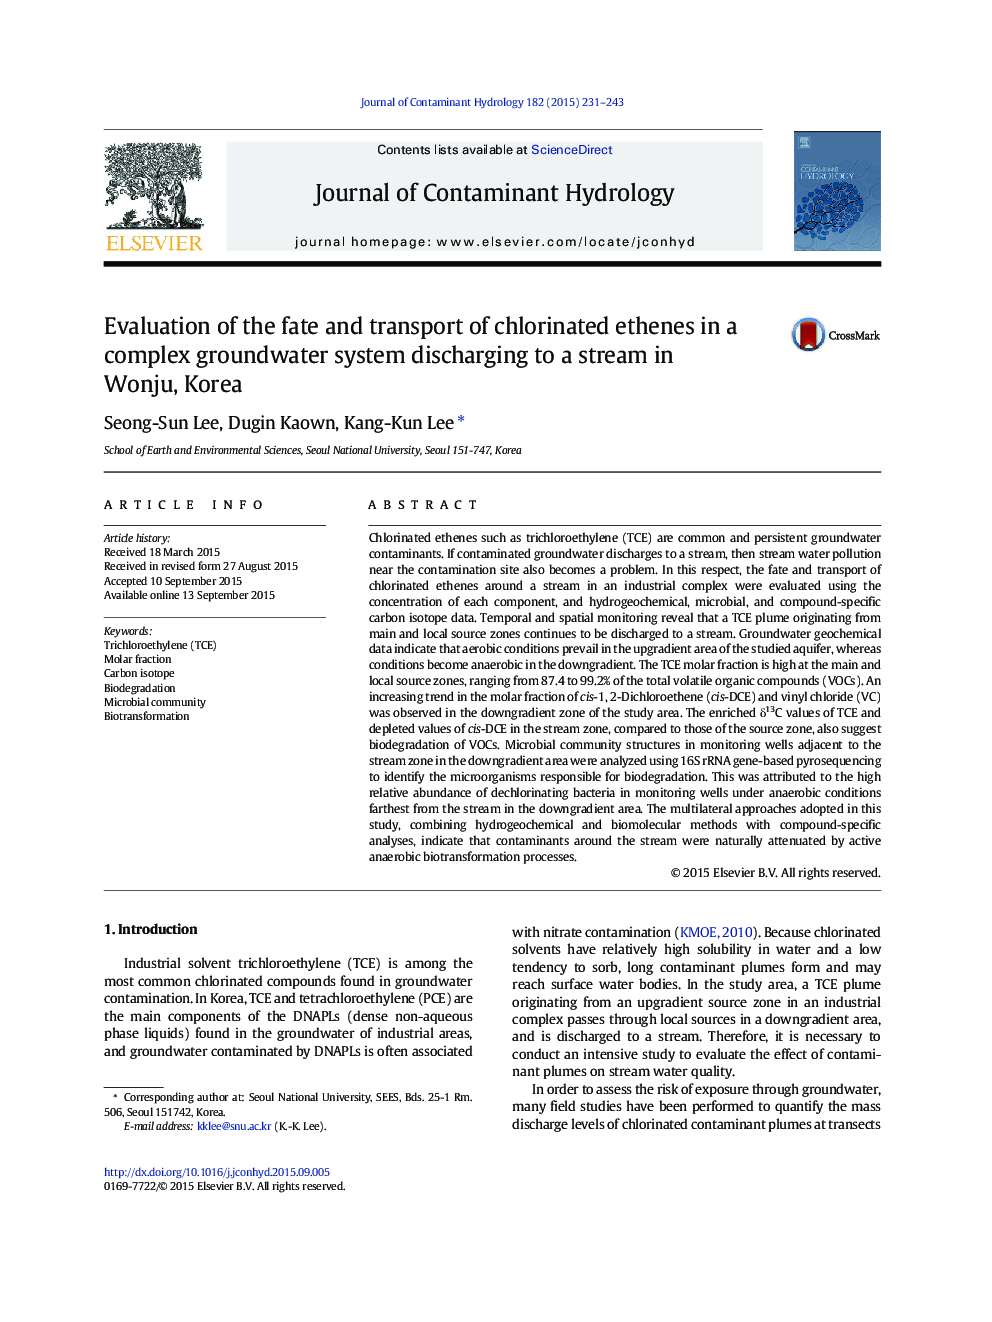 Evaluation of the fate and transport of chlorinated ethenes in a complex groundwater system discharging to a stream in Wonju, Korea